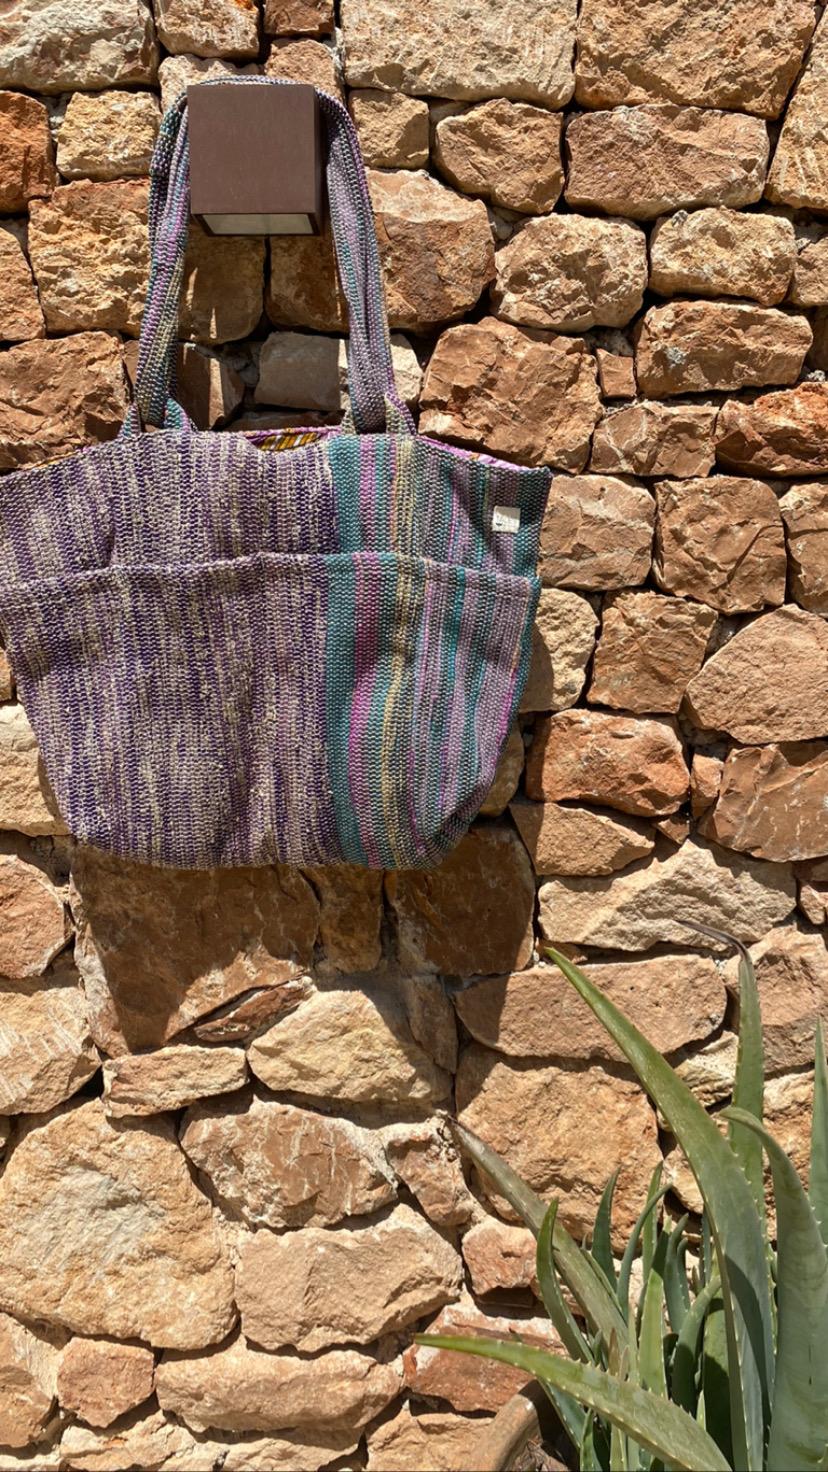 Large Sari Bag, handcrafted Elegance with a sustainable story - SB018